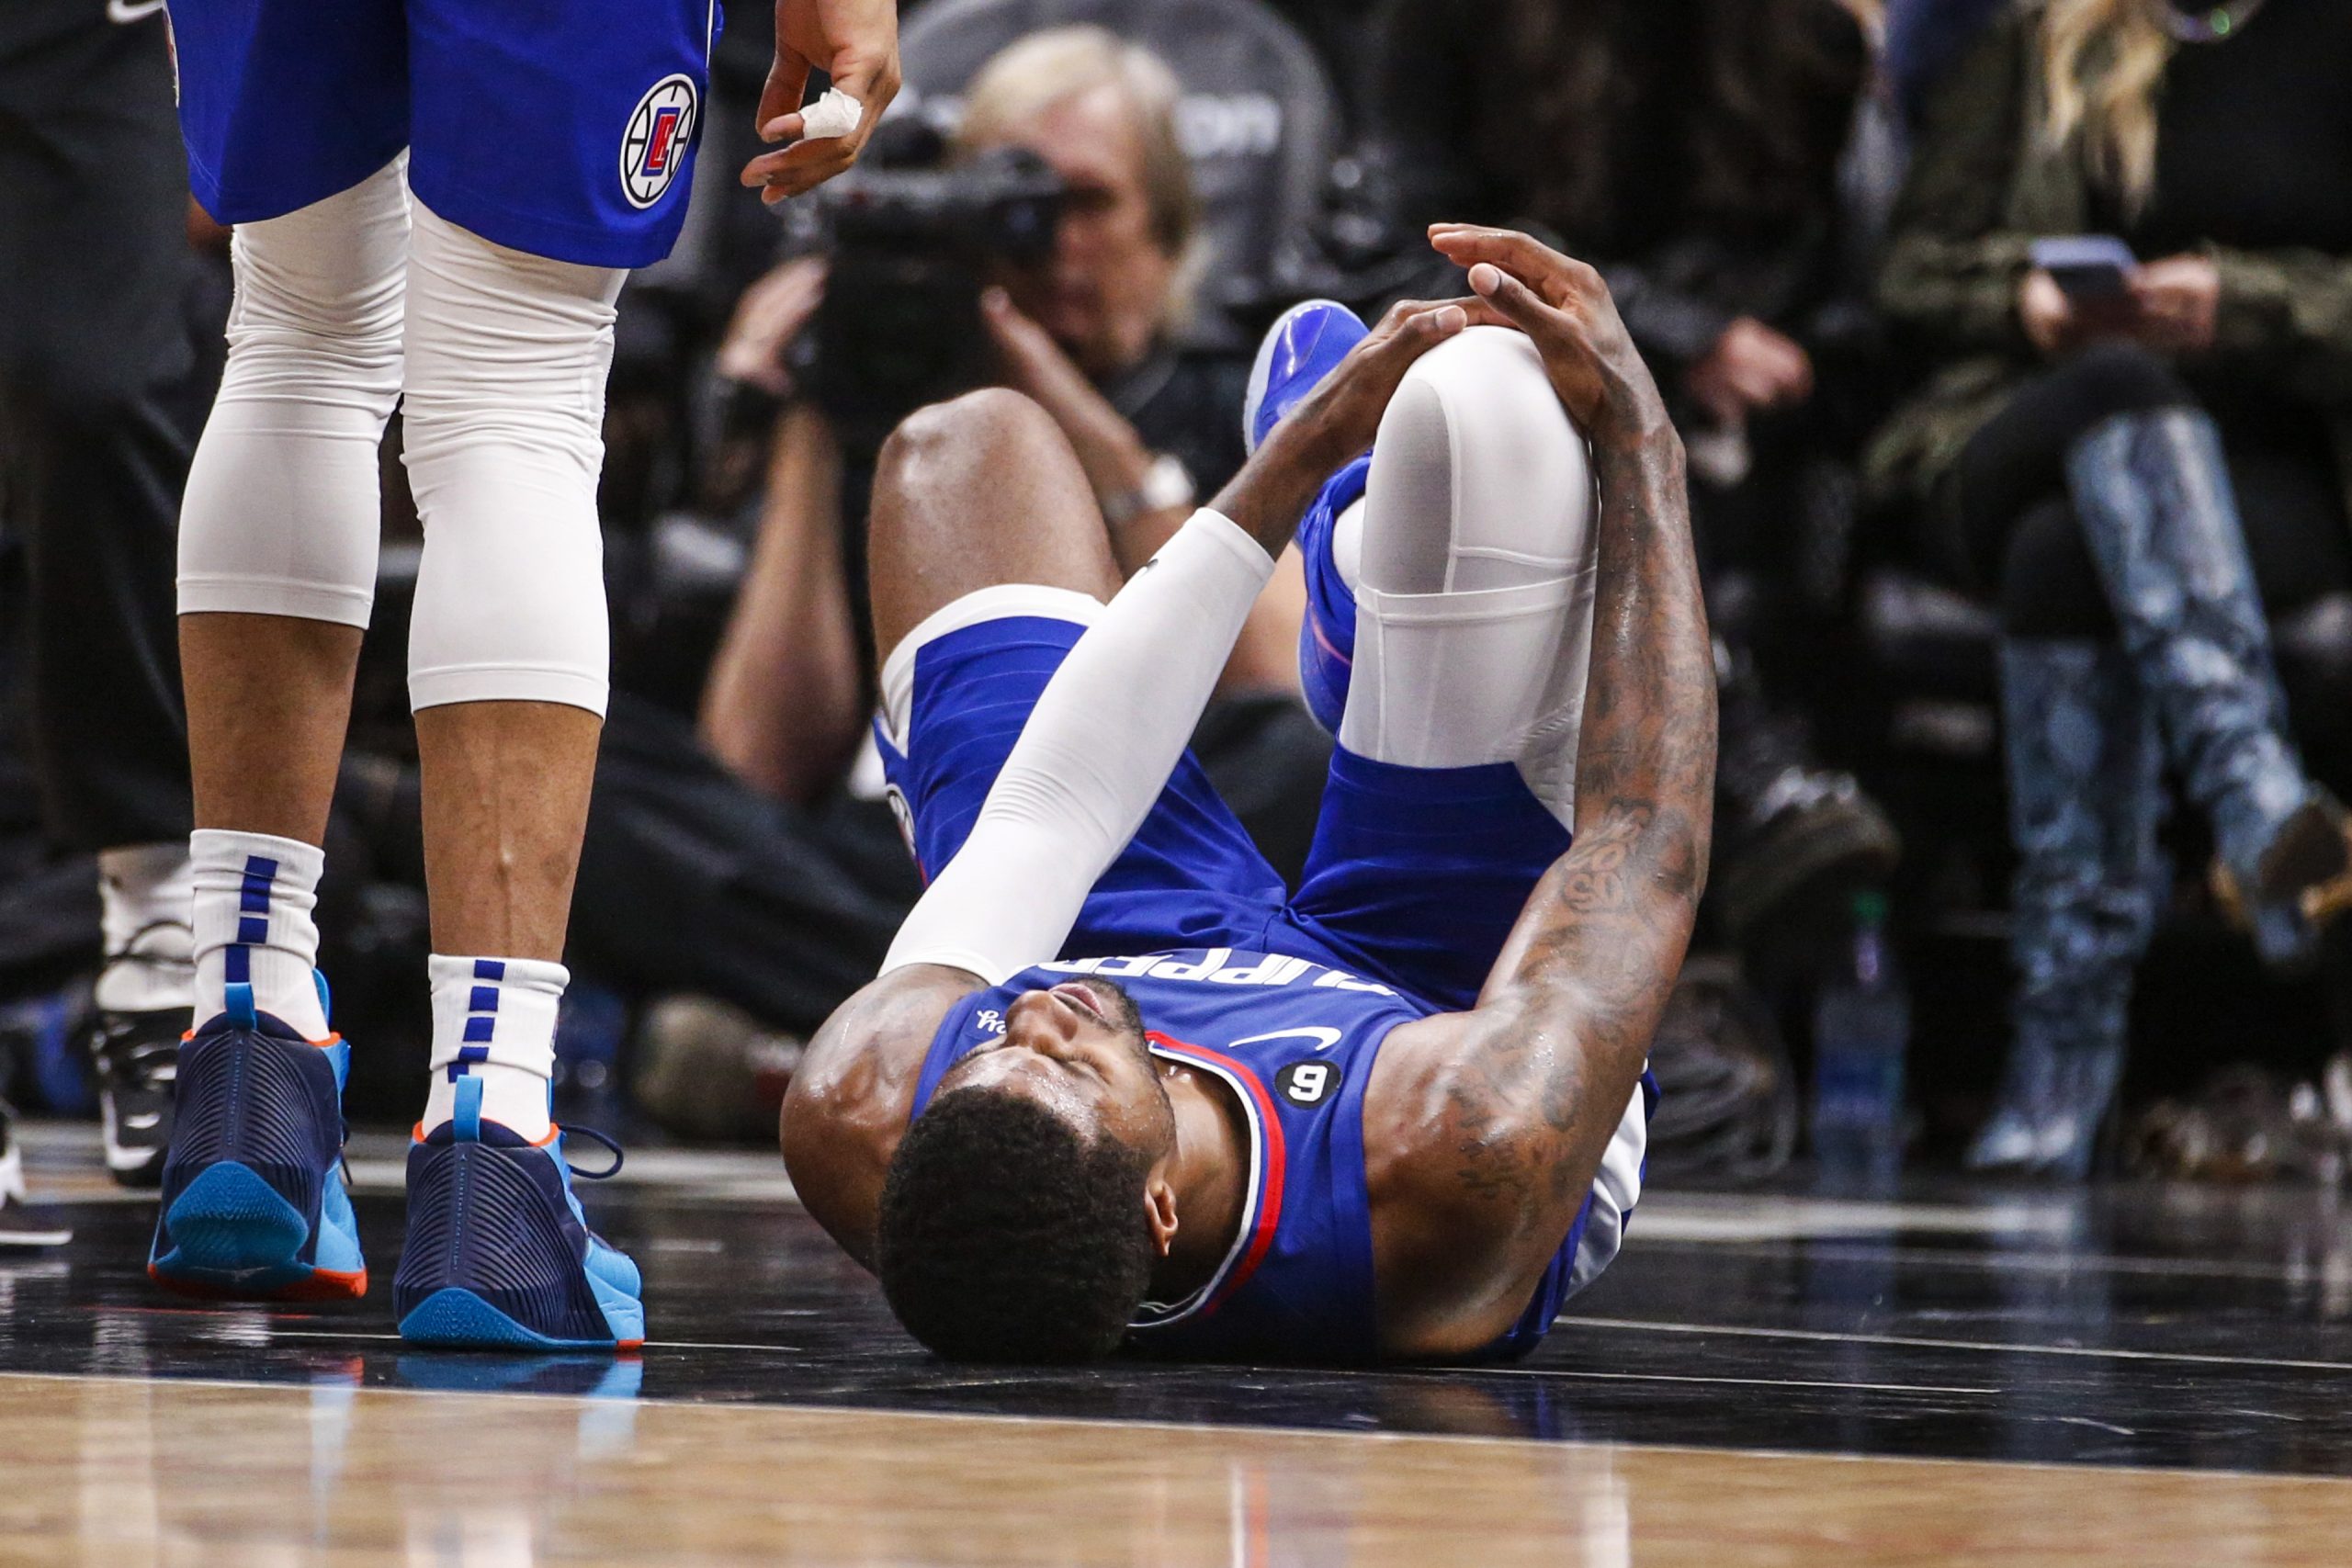 Los Angeles Clippers forward Paul George, right, lies on the court after an injury during the second half of an the team's NBA basketball game against the Oklahoma City Thunder on Tuesday, March 21, 2023, in Los Angeles. (AP Photo/Ringo H.W. Chiu)